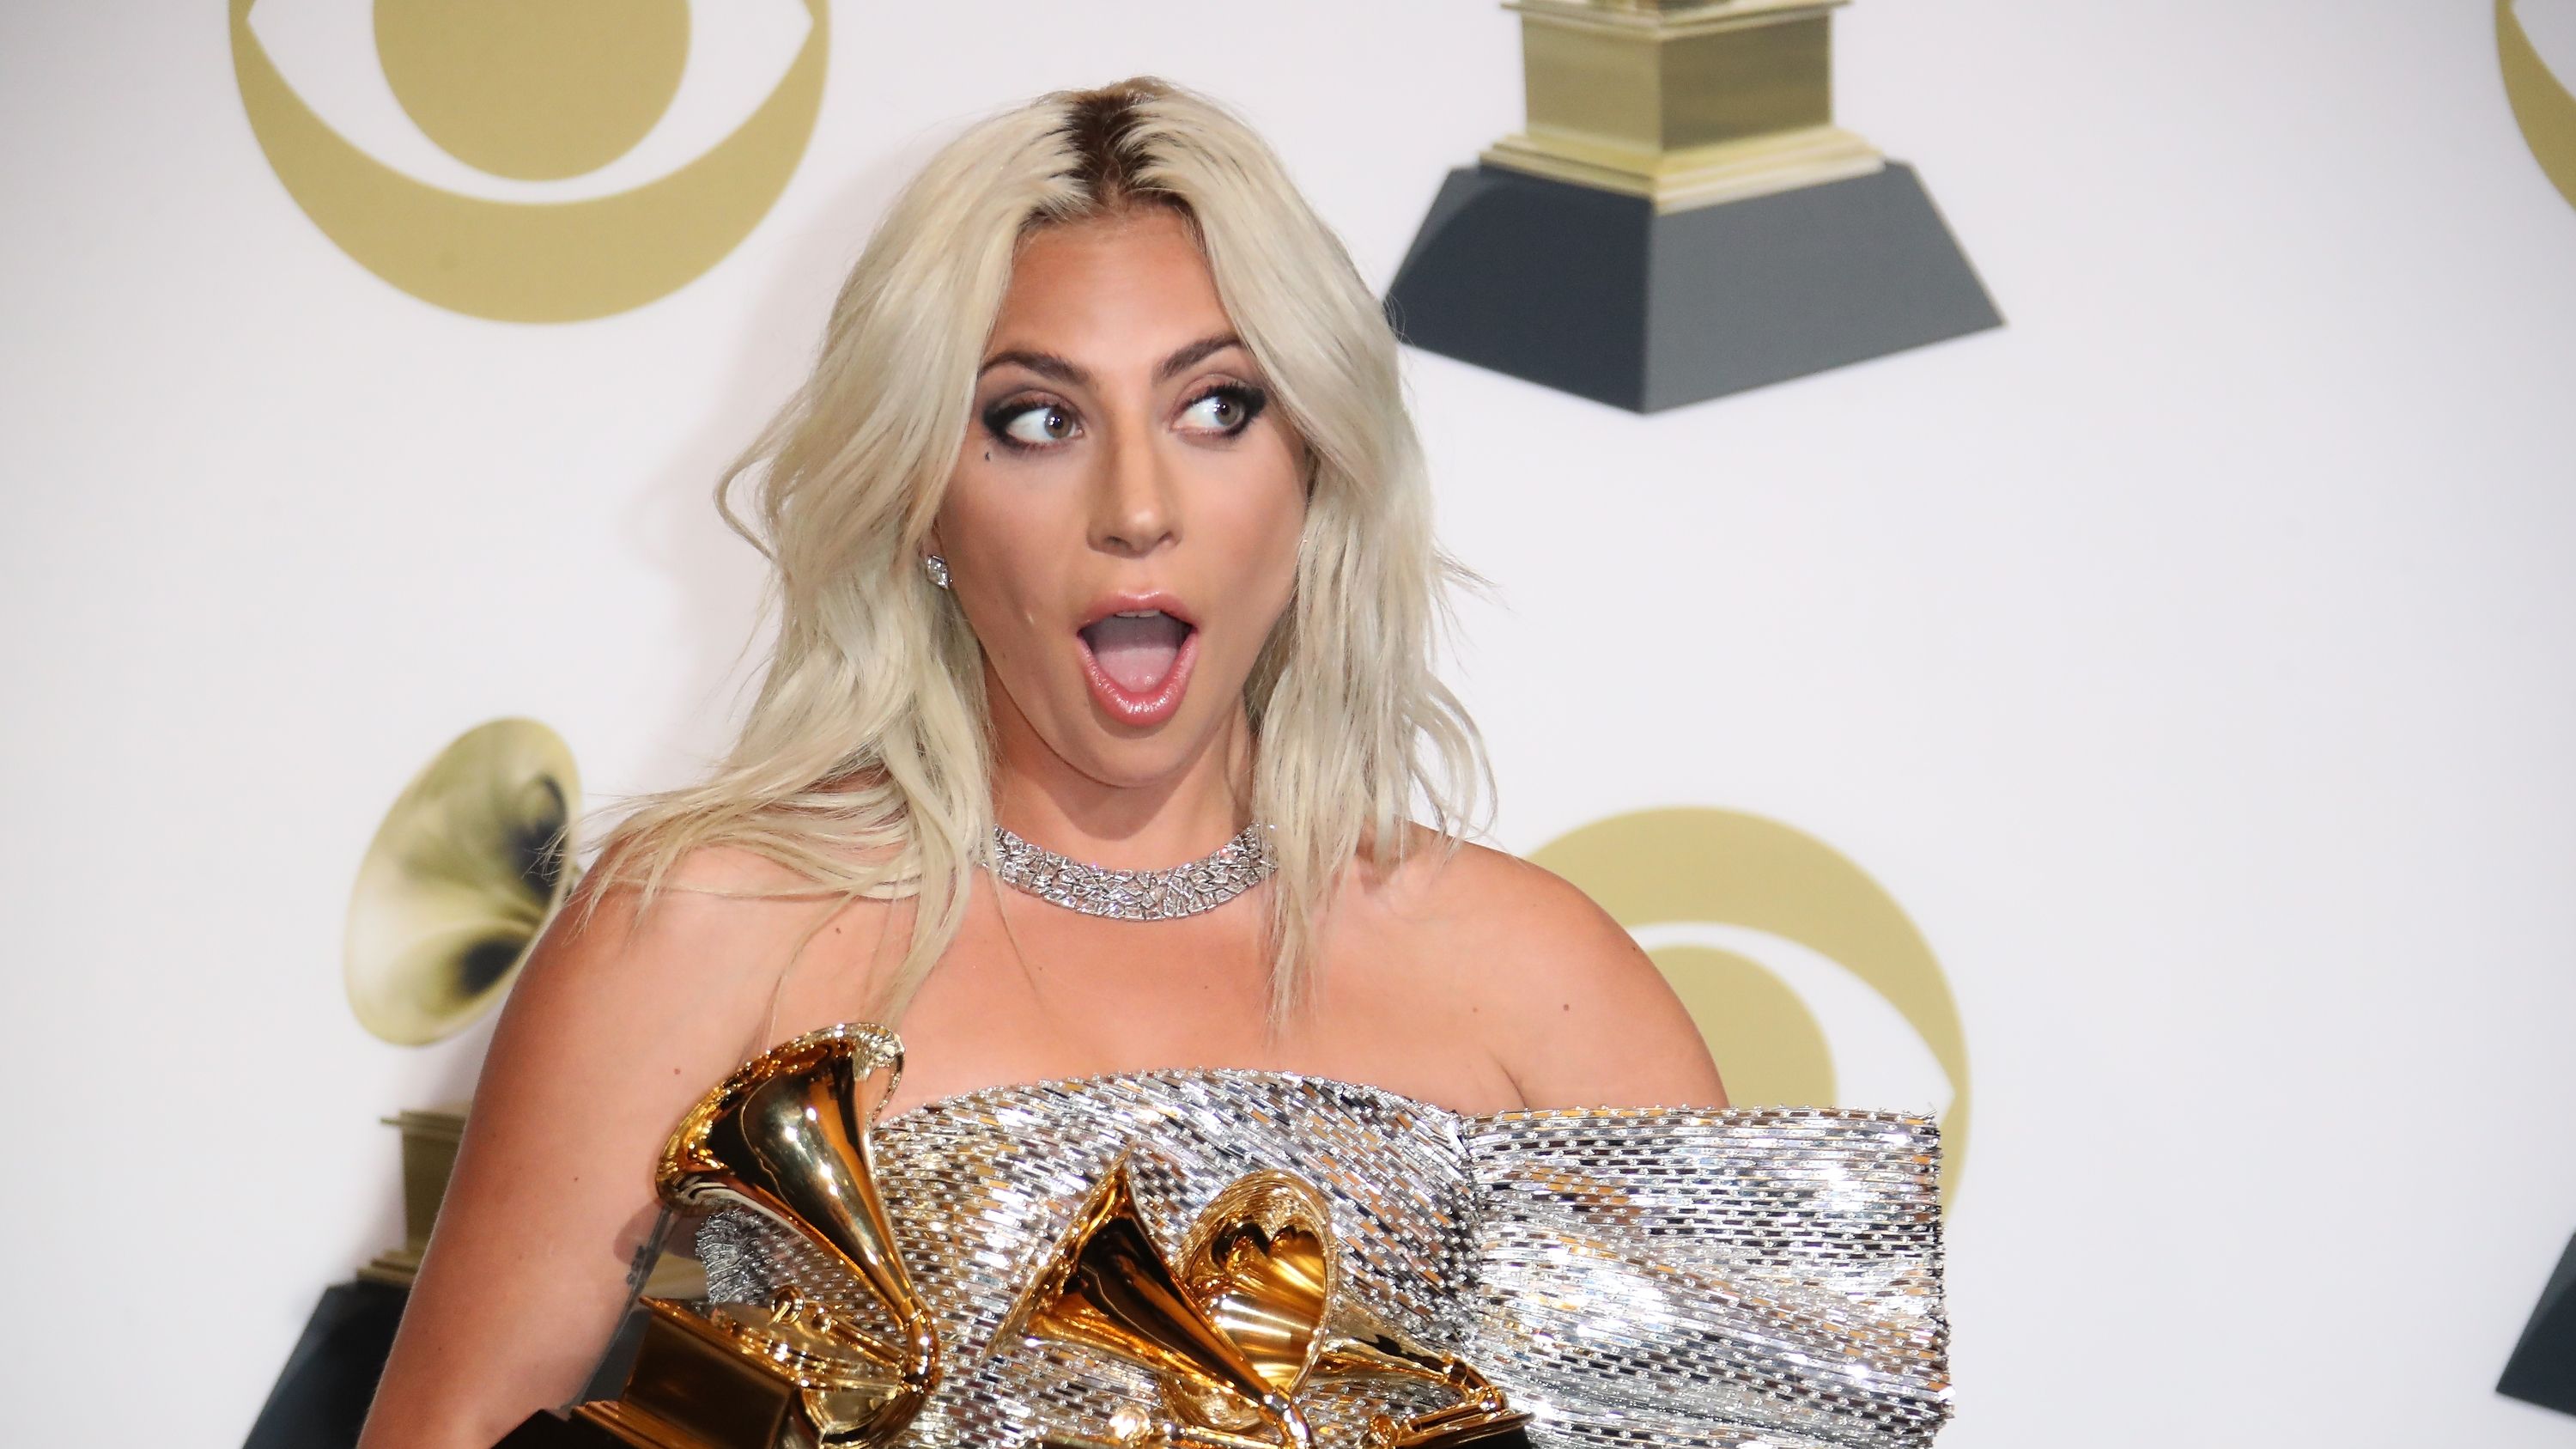 https://hips.hearstapps.com/hmg-prod/images/lady-gaga-poses-in-the-press-room-with-her-awards-for-best-news-photo-1579718269.jpg?crop=1xw:0.78892xh;center,top